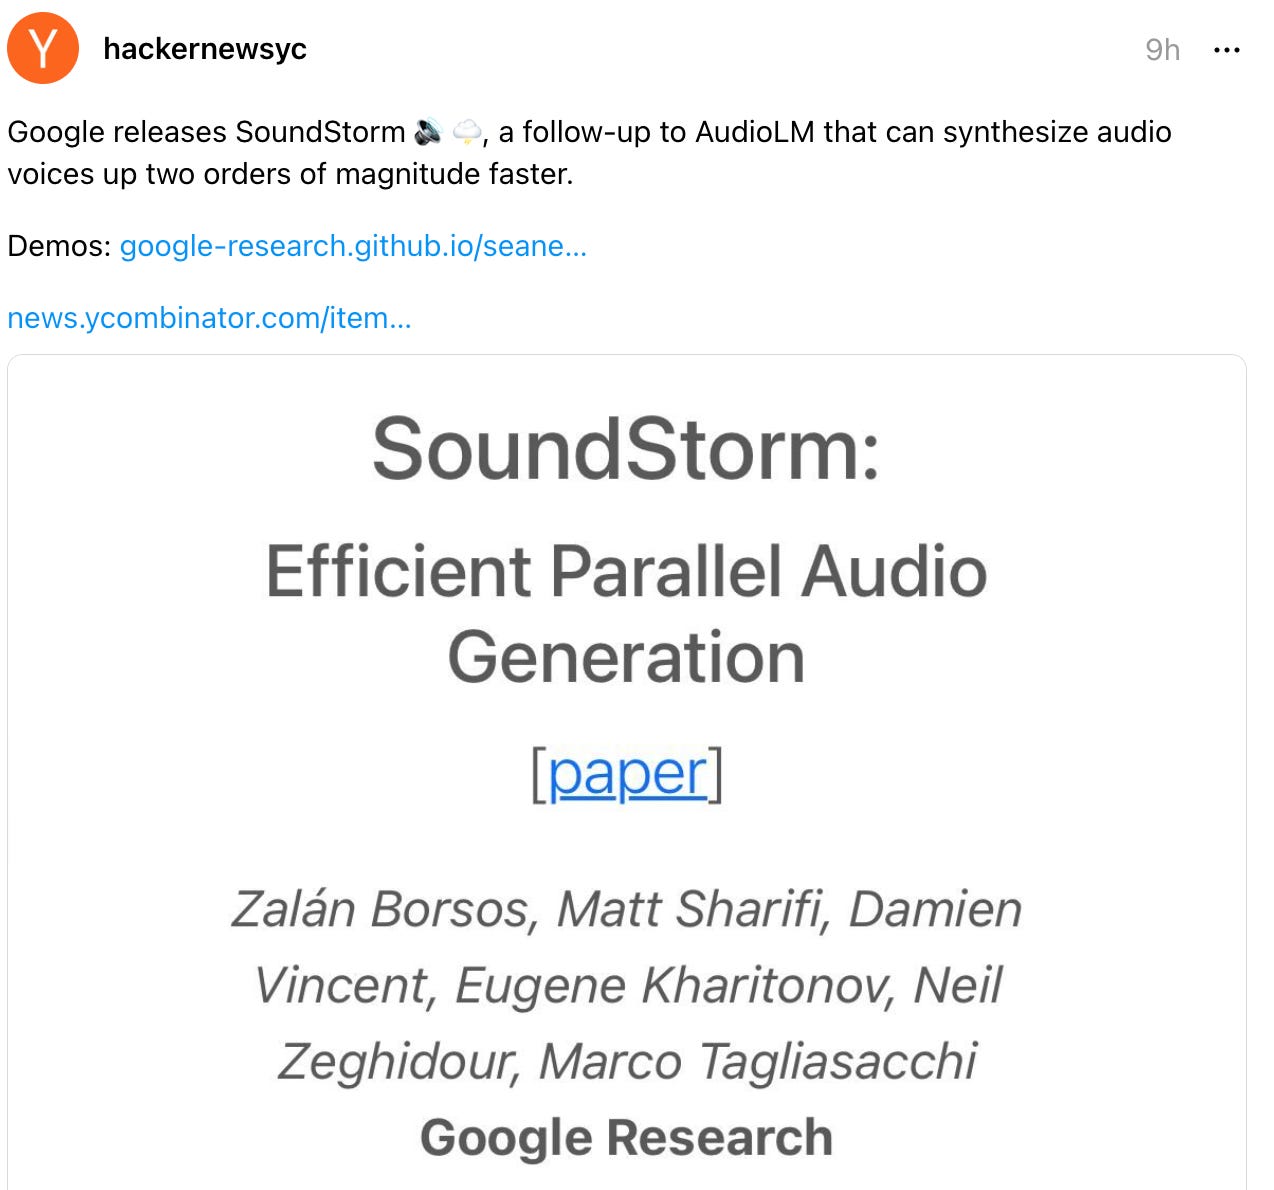  hackernewsyc 9h Google releases SoundStorm 🔊 🌩️, a follow-up to AudioLM that can synthesize audio voices up two orders of magnitude faster.  Demos: google-research.github.io/seane…  news.ycombinator.com/item…